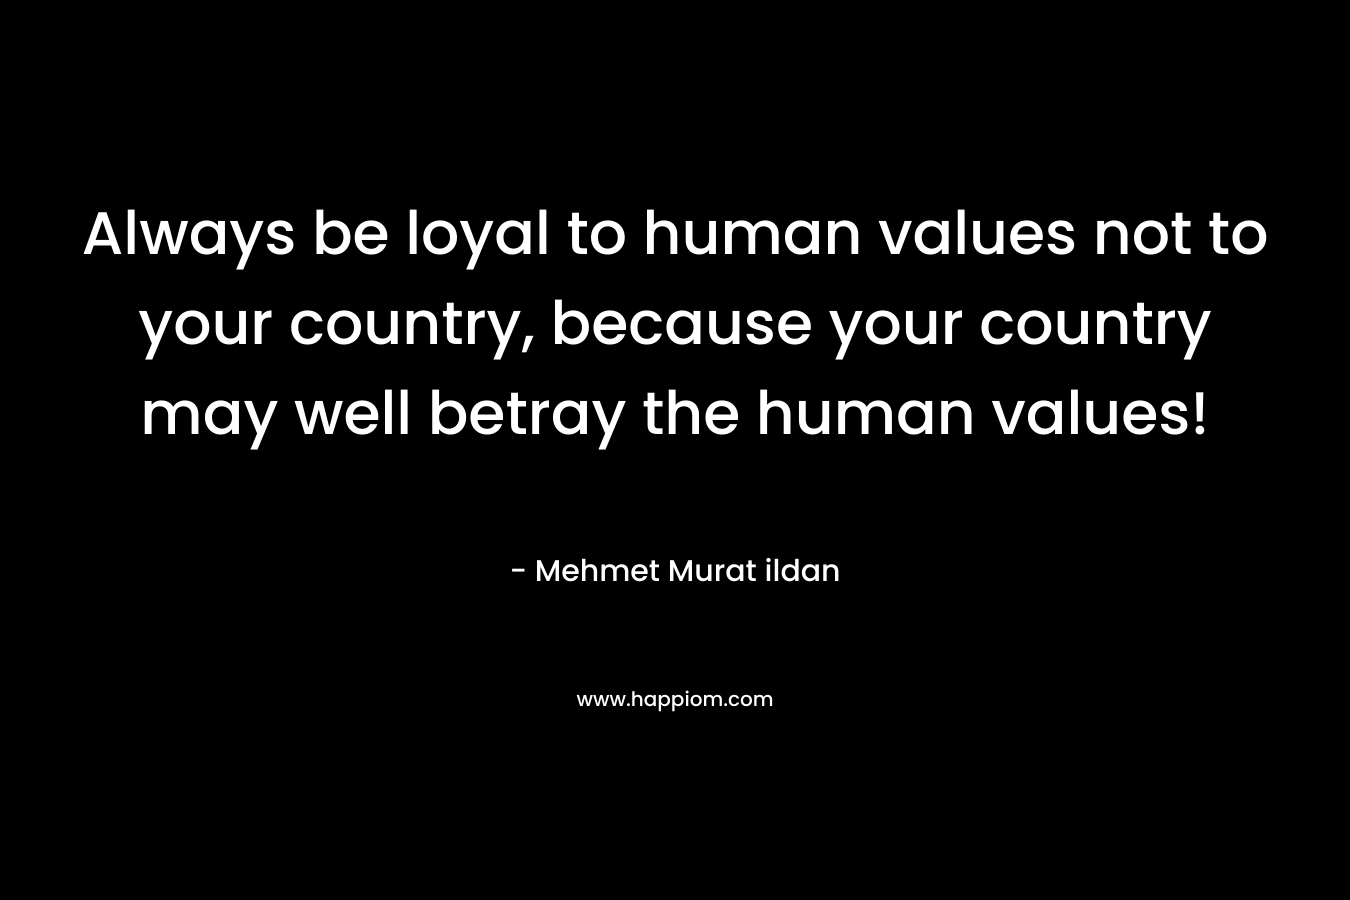 Always be loyal to human values not to your country, because your country may well betray the human values! – Mehmet Murat ildan